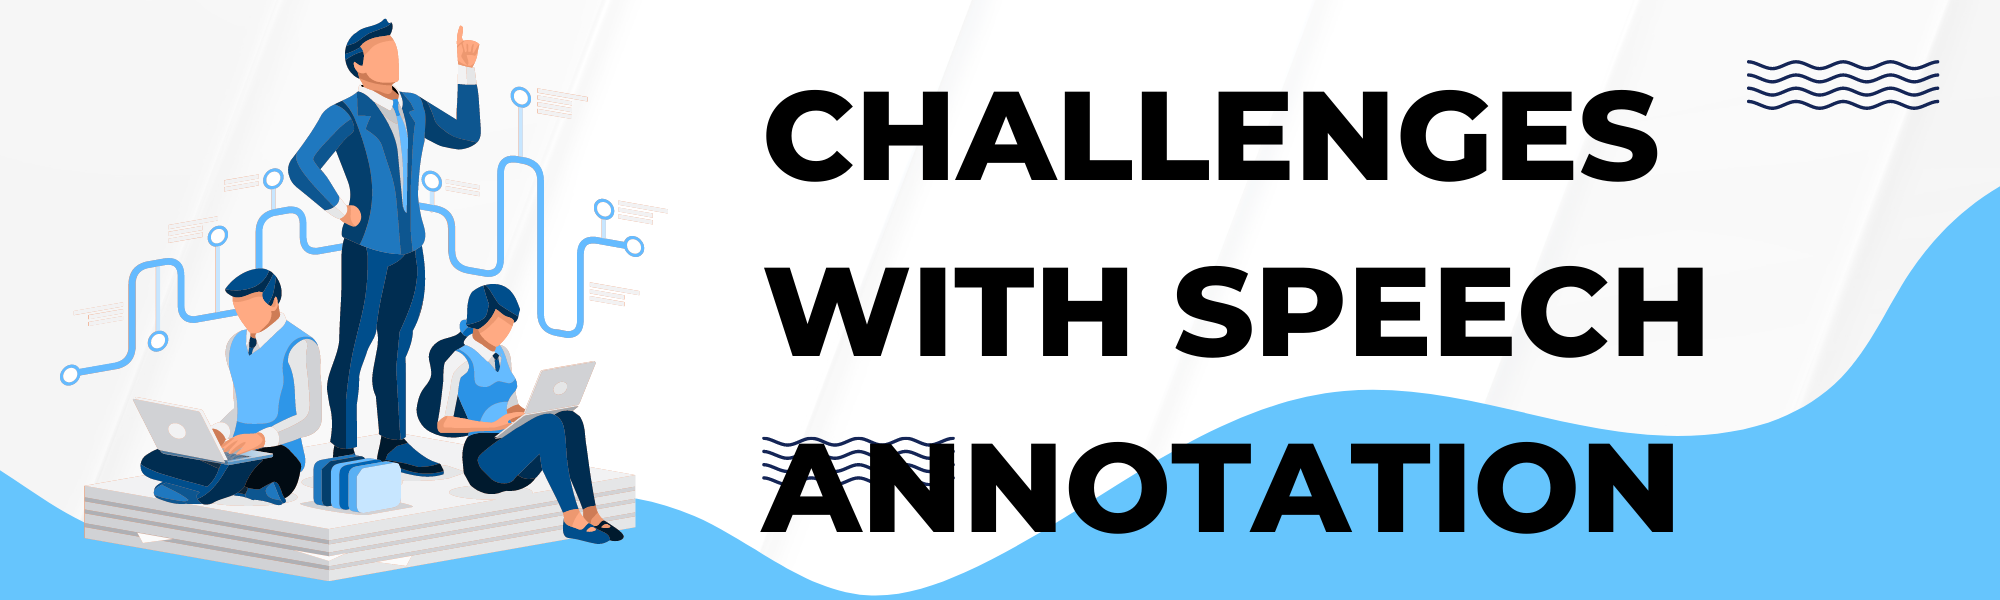 Challenges With Speech Annotation 